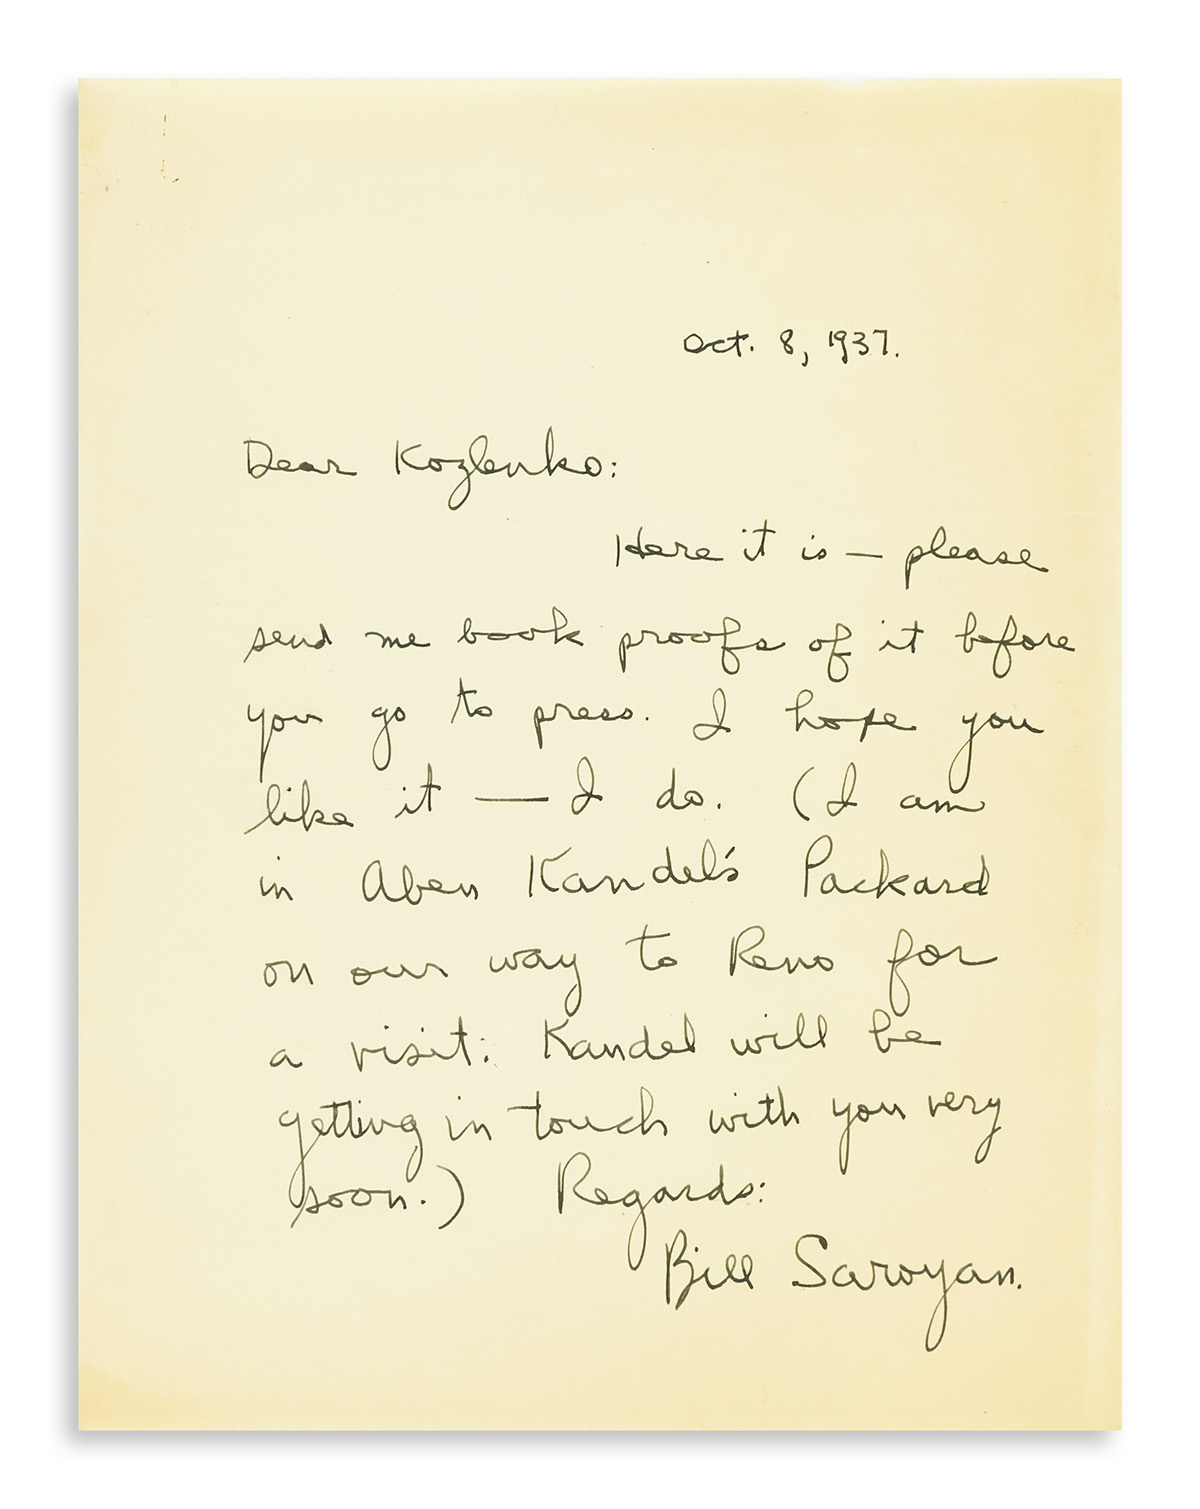 SAROYAN, WILLIAM. Small archive of 13 letters Signed, Bill Saroyan or William Saroyan, to editor William Kozlenko, including two Au